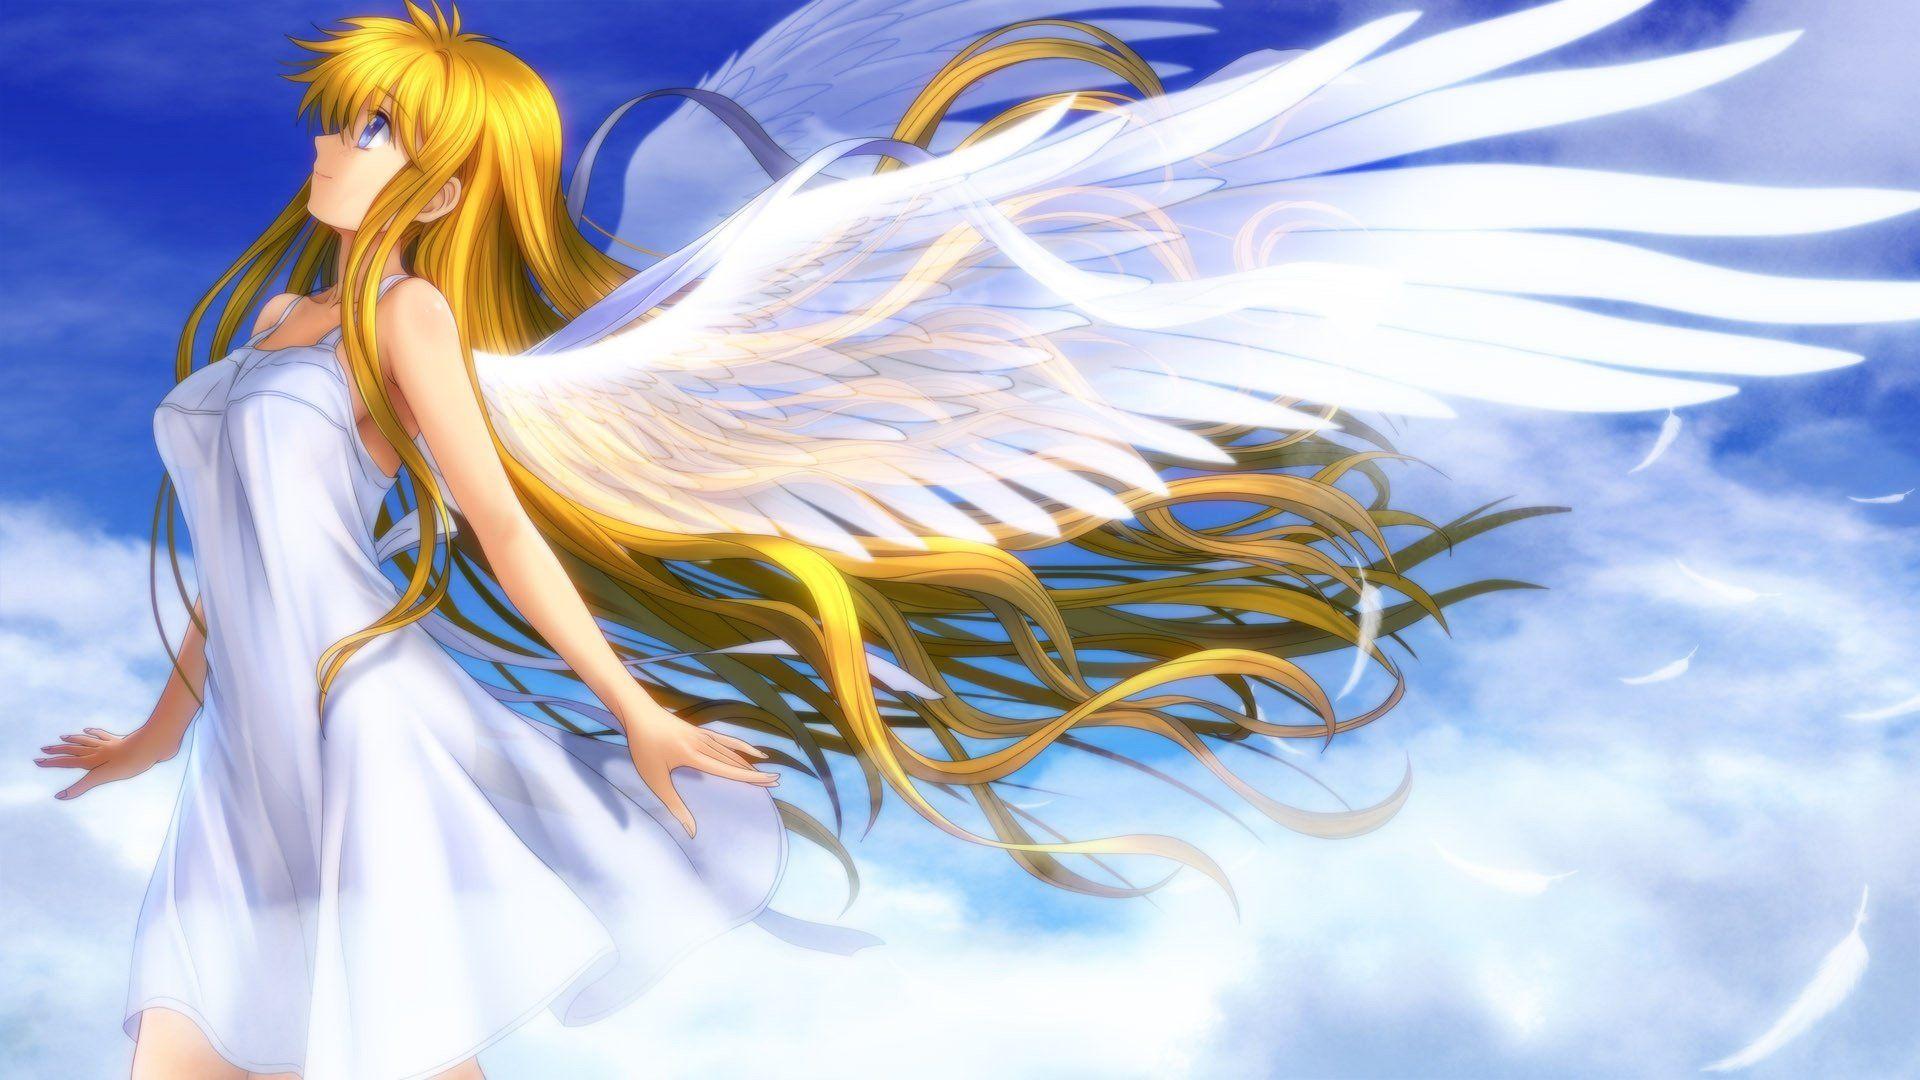 Anime Wallpapers Angel - Wallpaper Cave